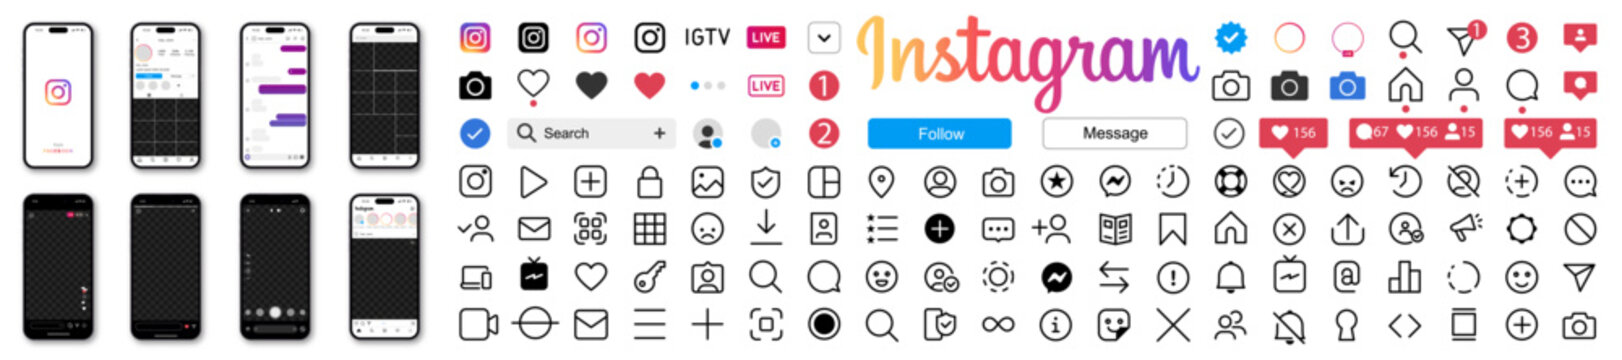 Big set instagram. Instagram mockup. Instagram screen social media and social network interface template. Instagram ui app interface, home, search, reel, shop, profile, share, save and more icons.